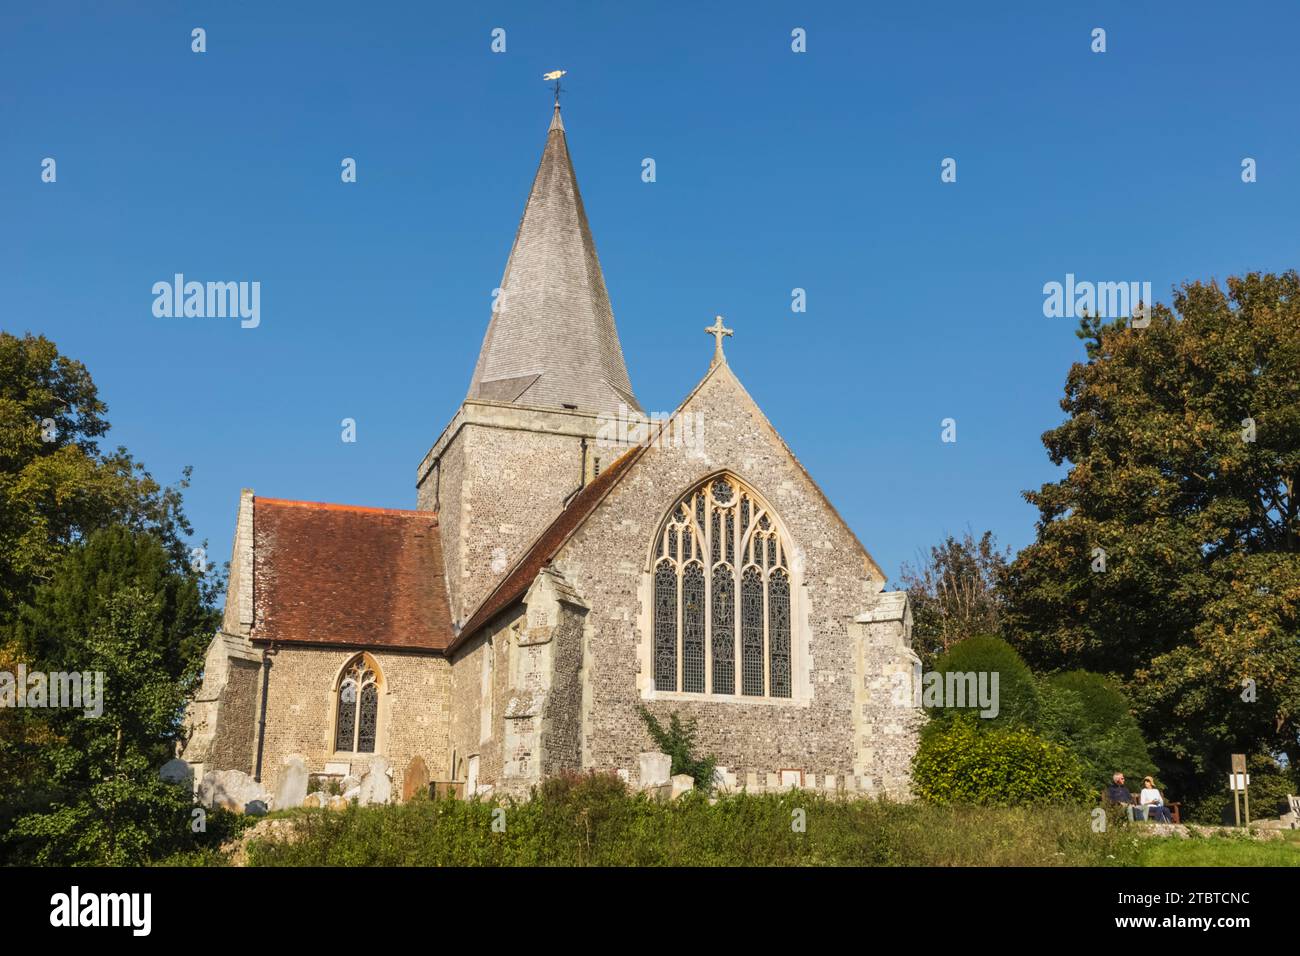 Angleterre, East Sussex, Alfriston, Alfriston Village, St Andrew's Church Banque D'Images